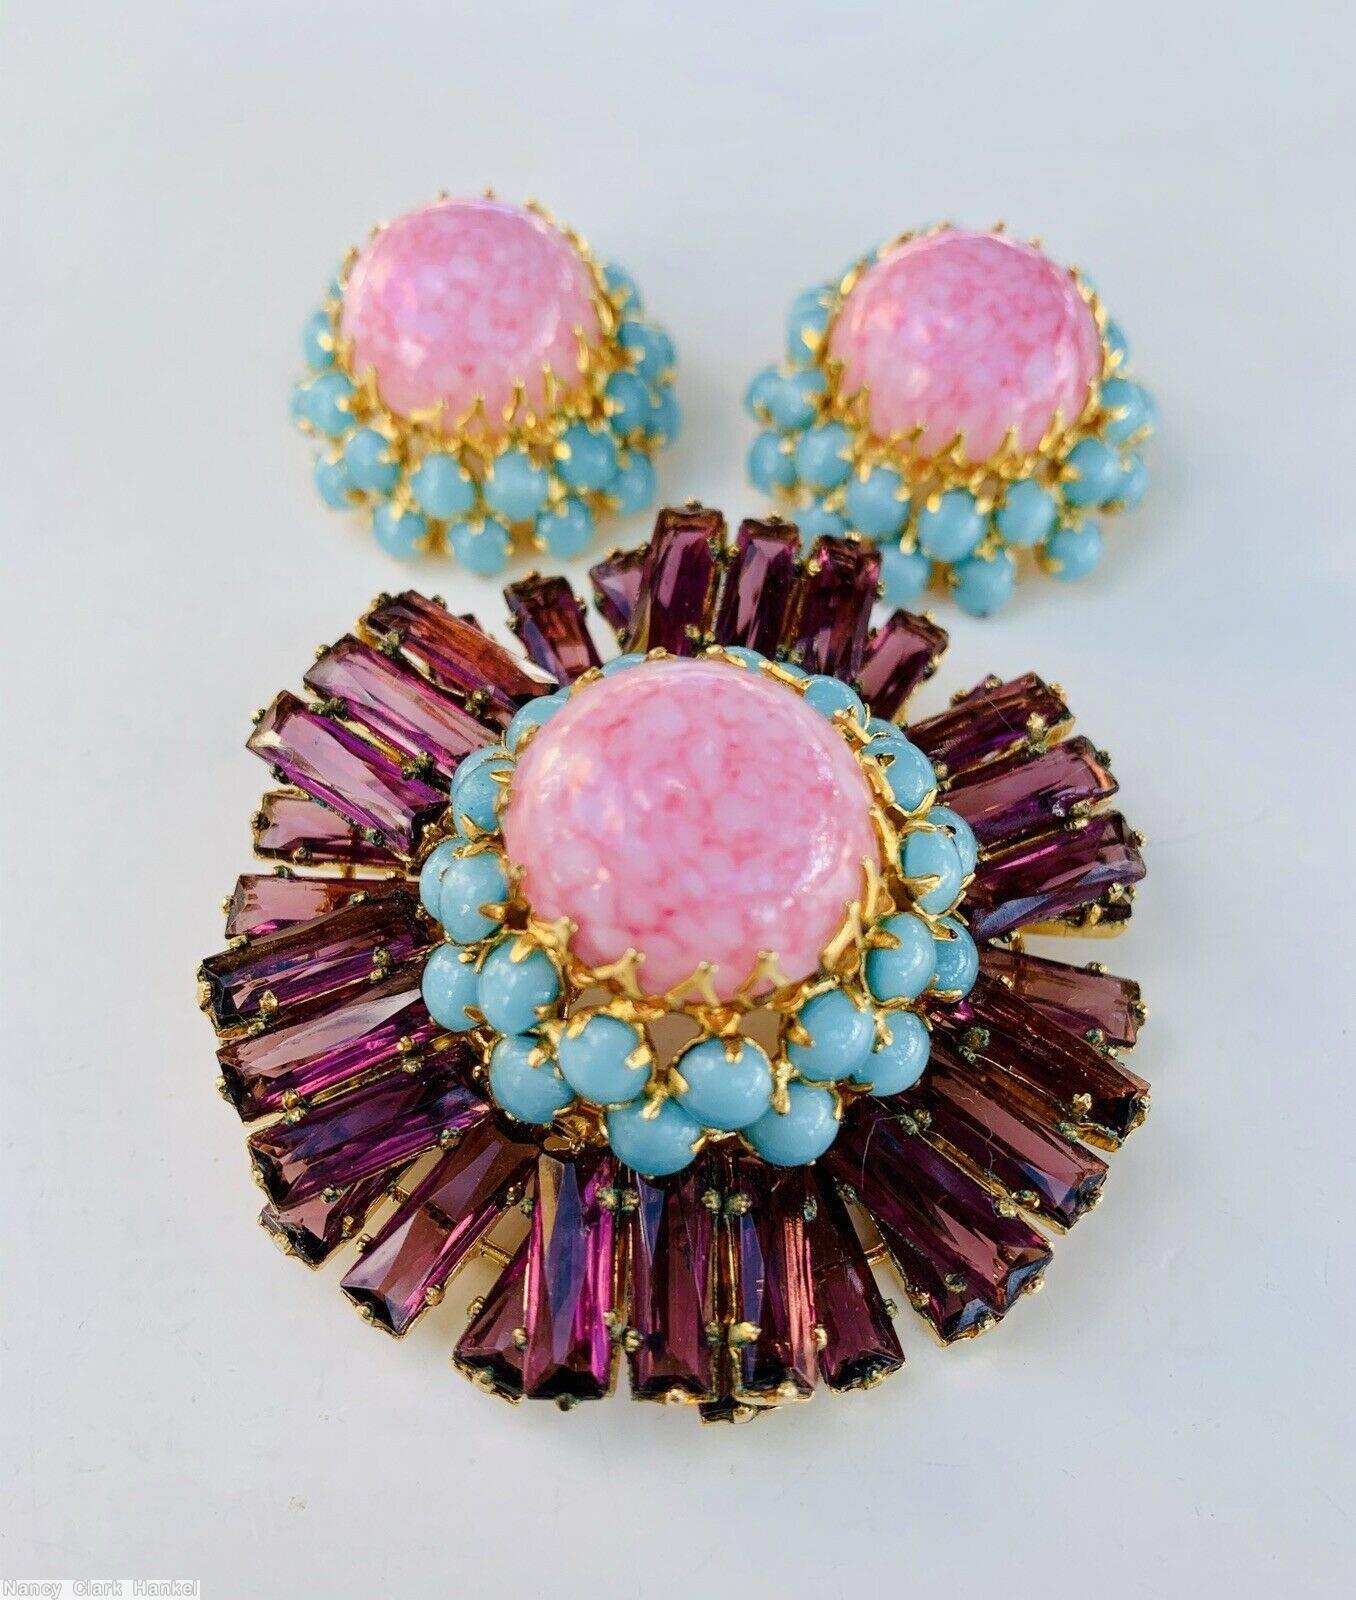 Schreiner 2 level hexagon ruffle each leve 6 group of 3 keystone large round cab center 2 round surrounding small chaton purple keystone opaque baby blue chaton marbled pink round cab goldtone jewelry